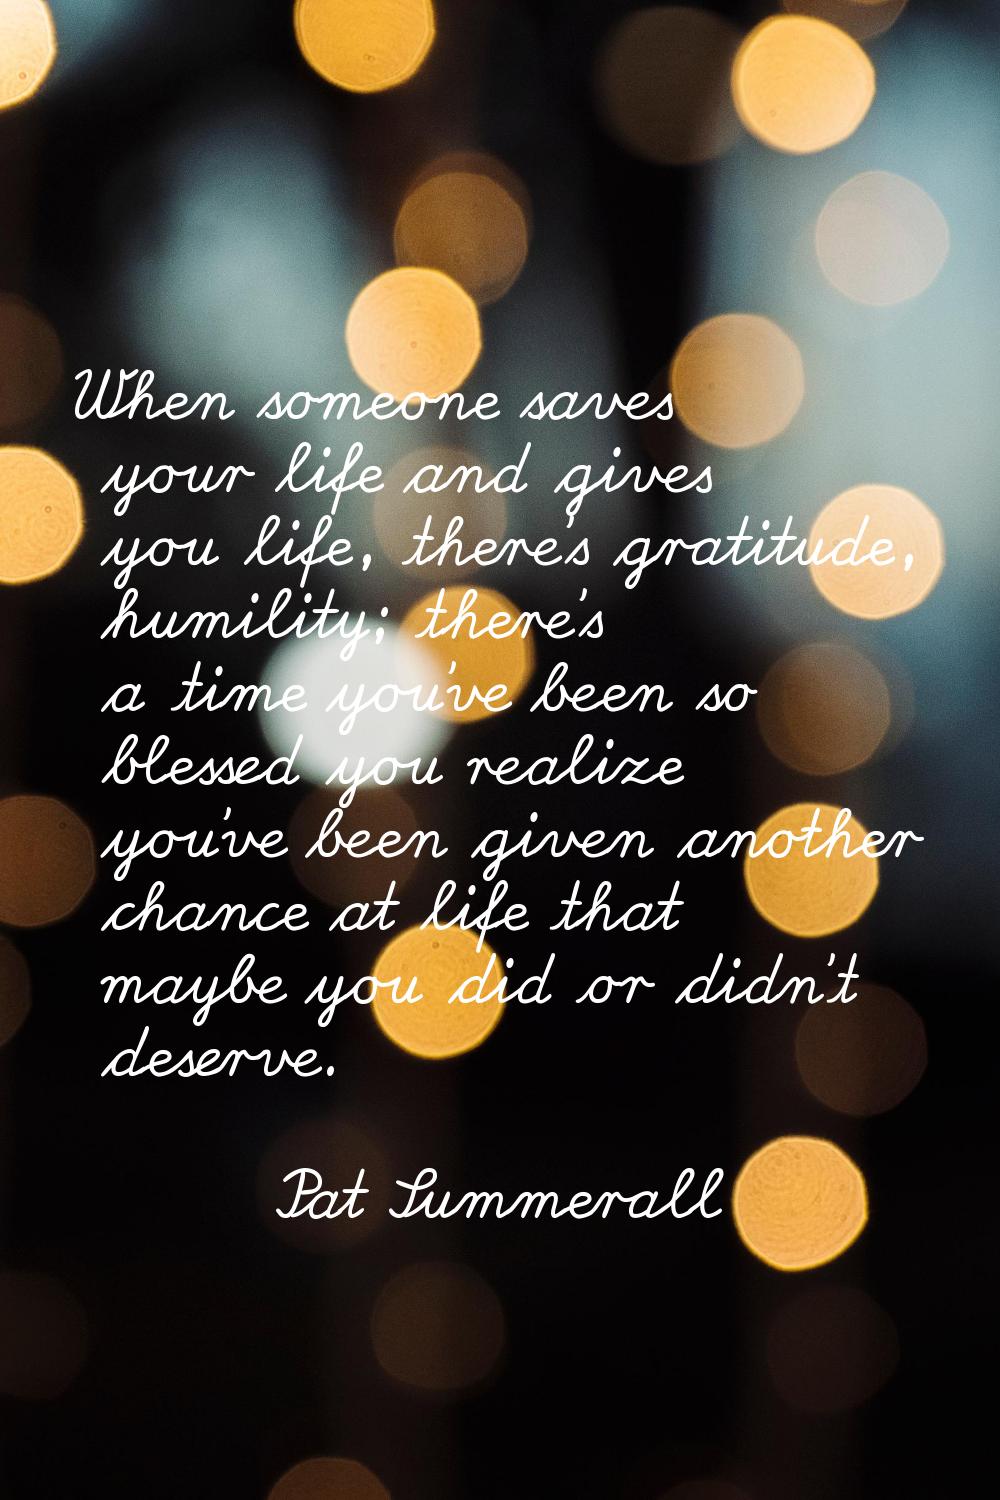 When someone saves your life and gives you life, there's gratitude, humility; there's a time you've